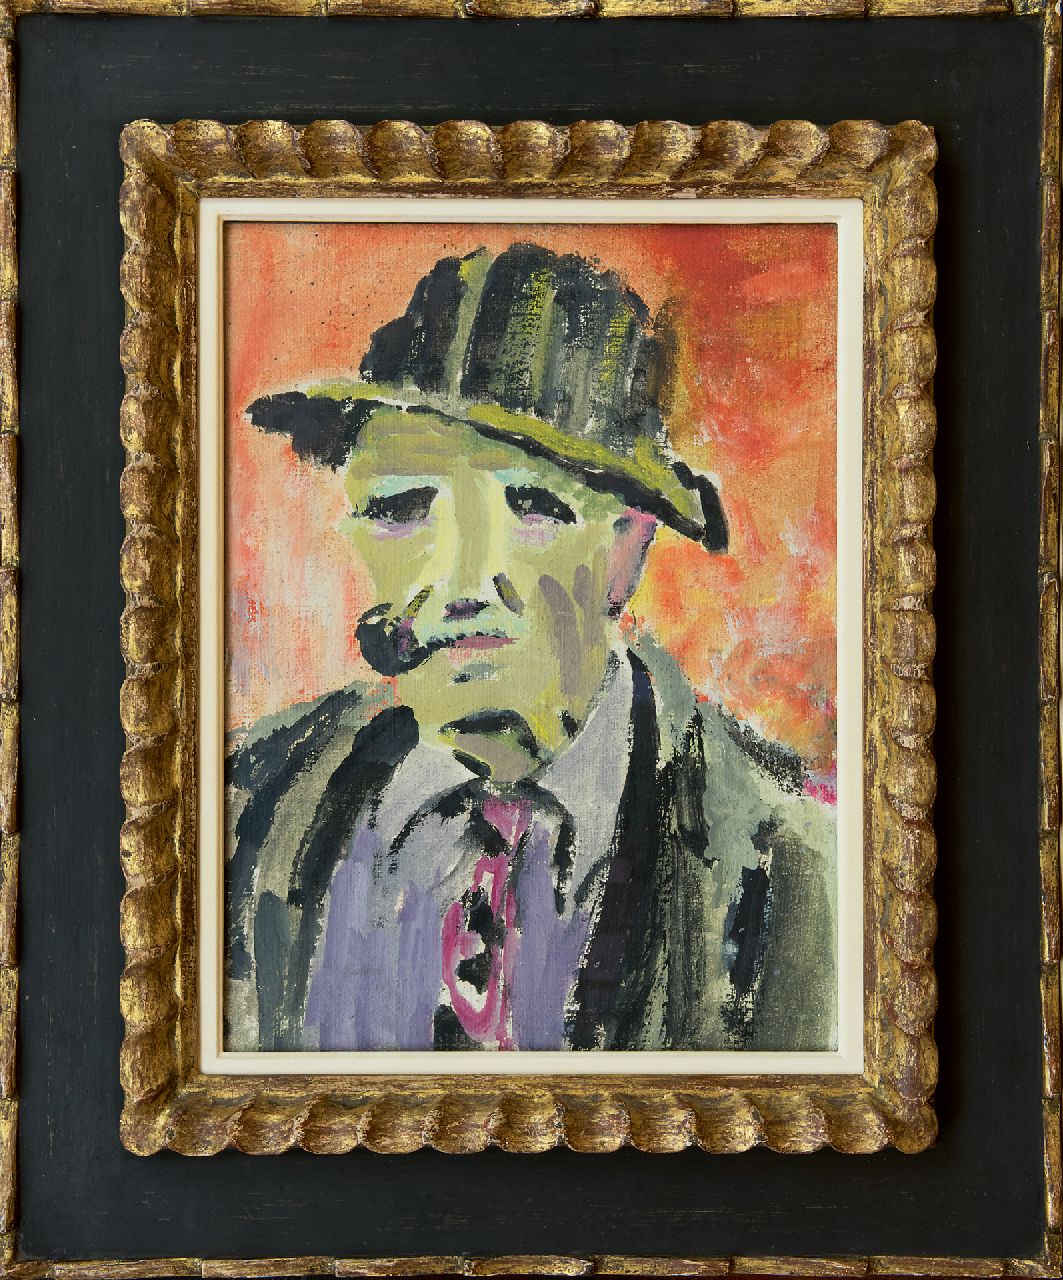 Altink J.  | Jan Altink, Portrait of a man with a pipe, wax paint on canvas 40.0 x 30.0 cm, painted ca. 1942